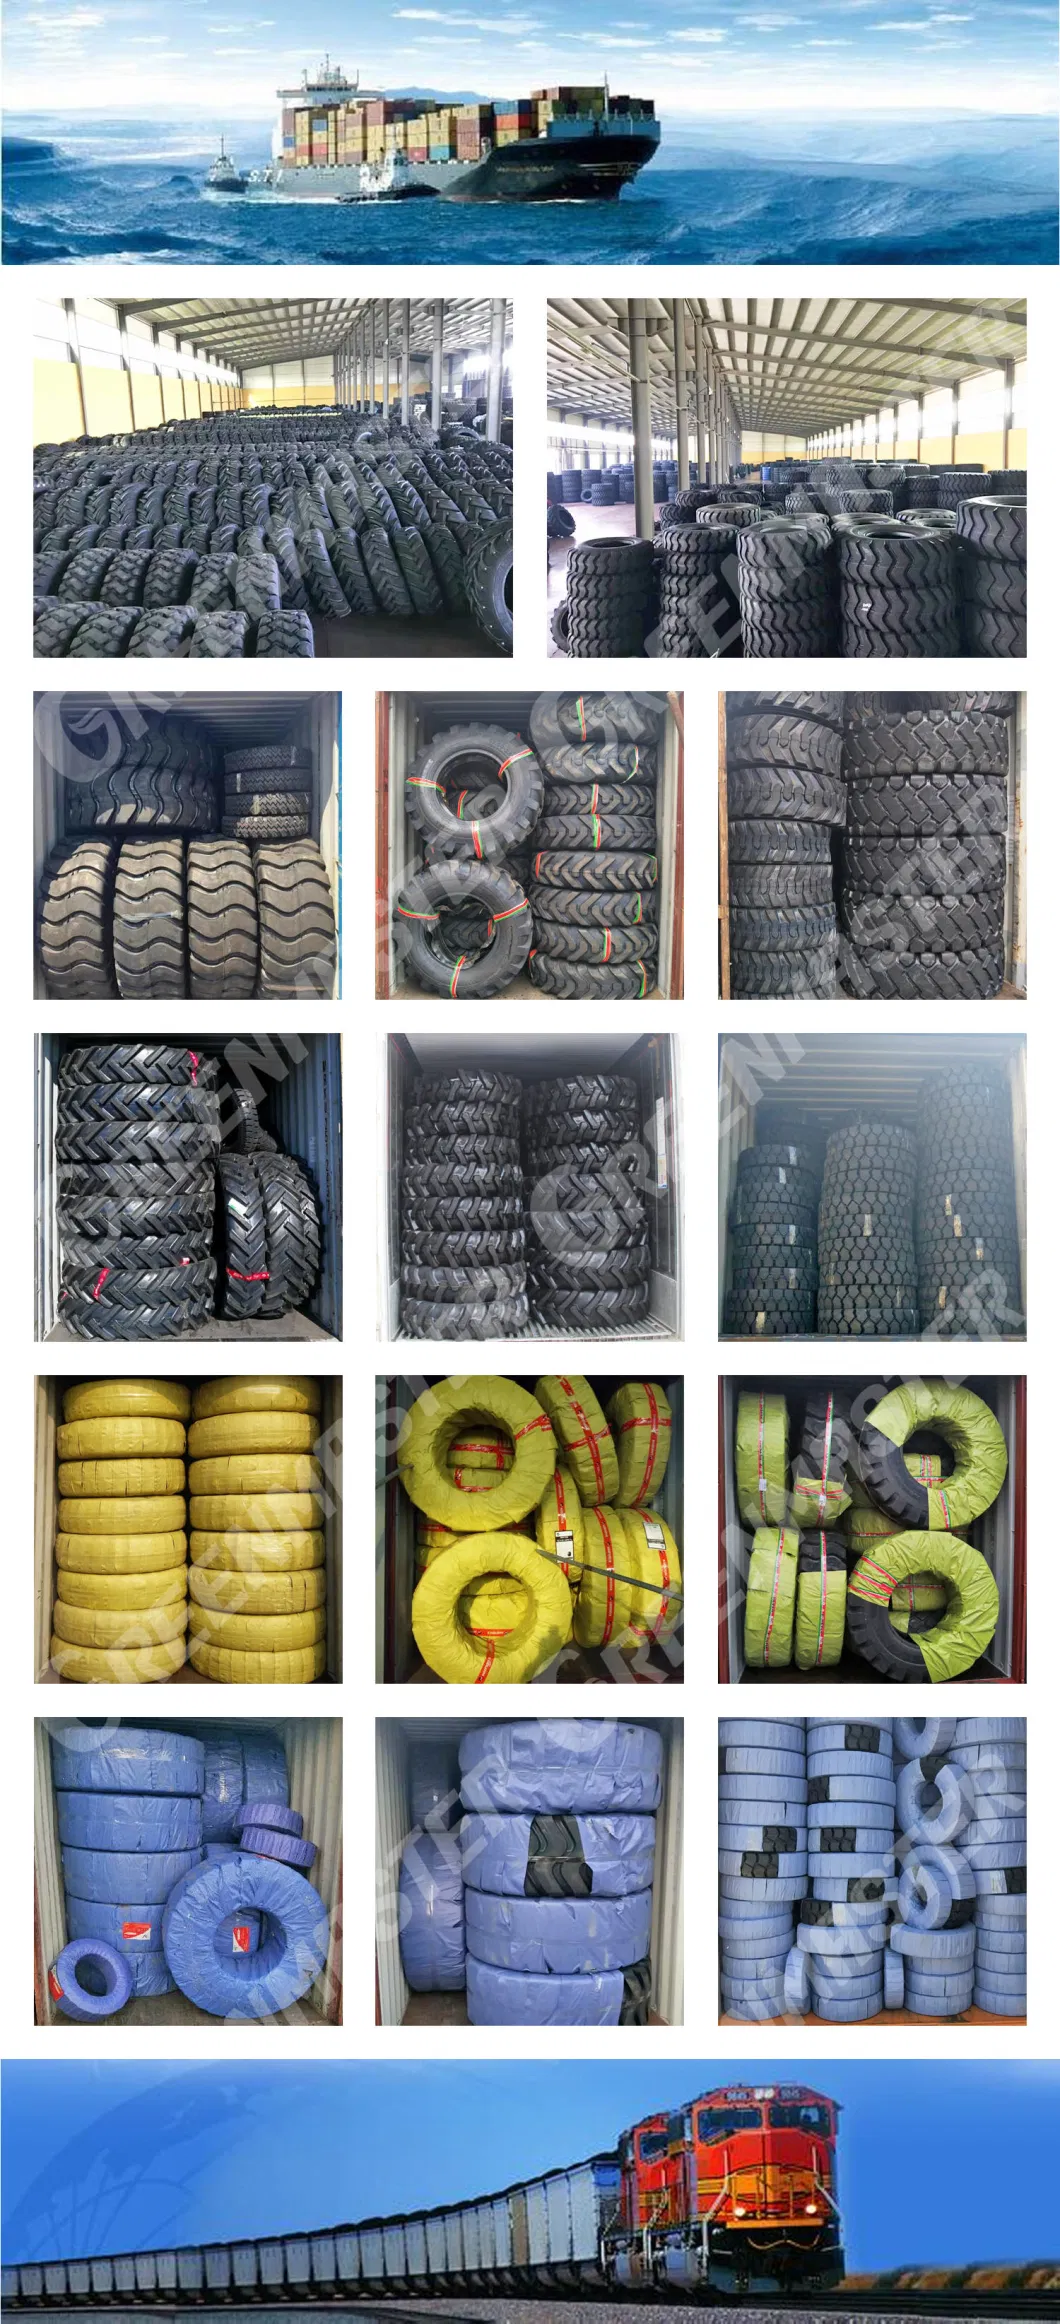 China Factory Wholesale Tricycle and Farm Tractor Tire, High Durabilityultra Light Truck (ULT) Tyre 135-10 5.00X10 4.00-12 4.50*12 with Wheel Rim